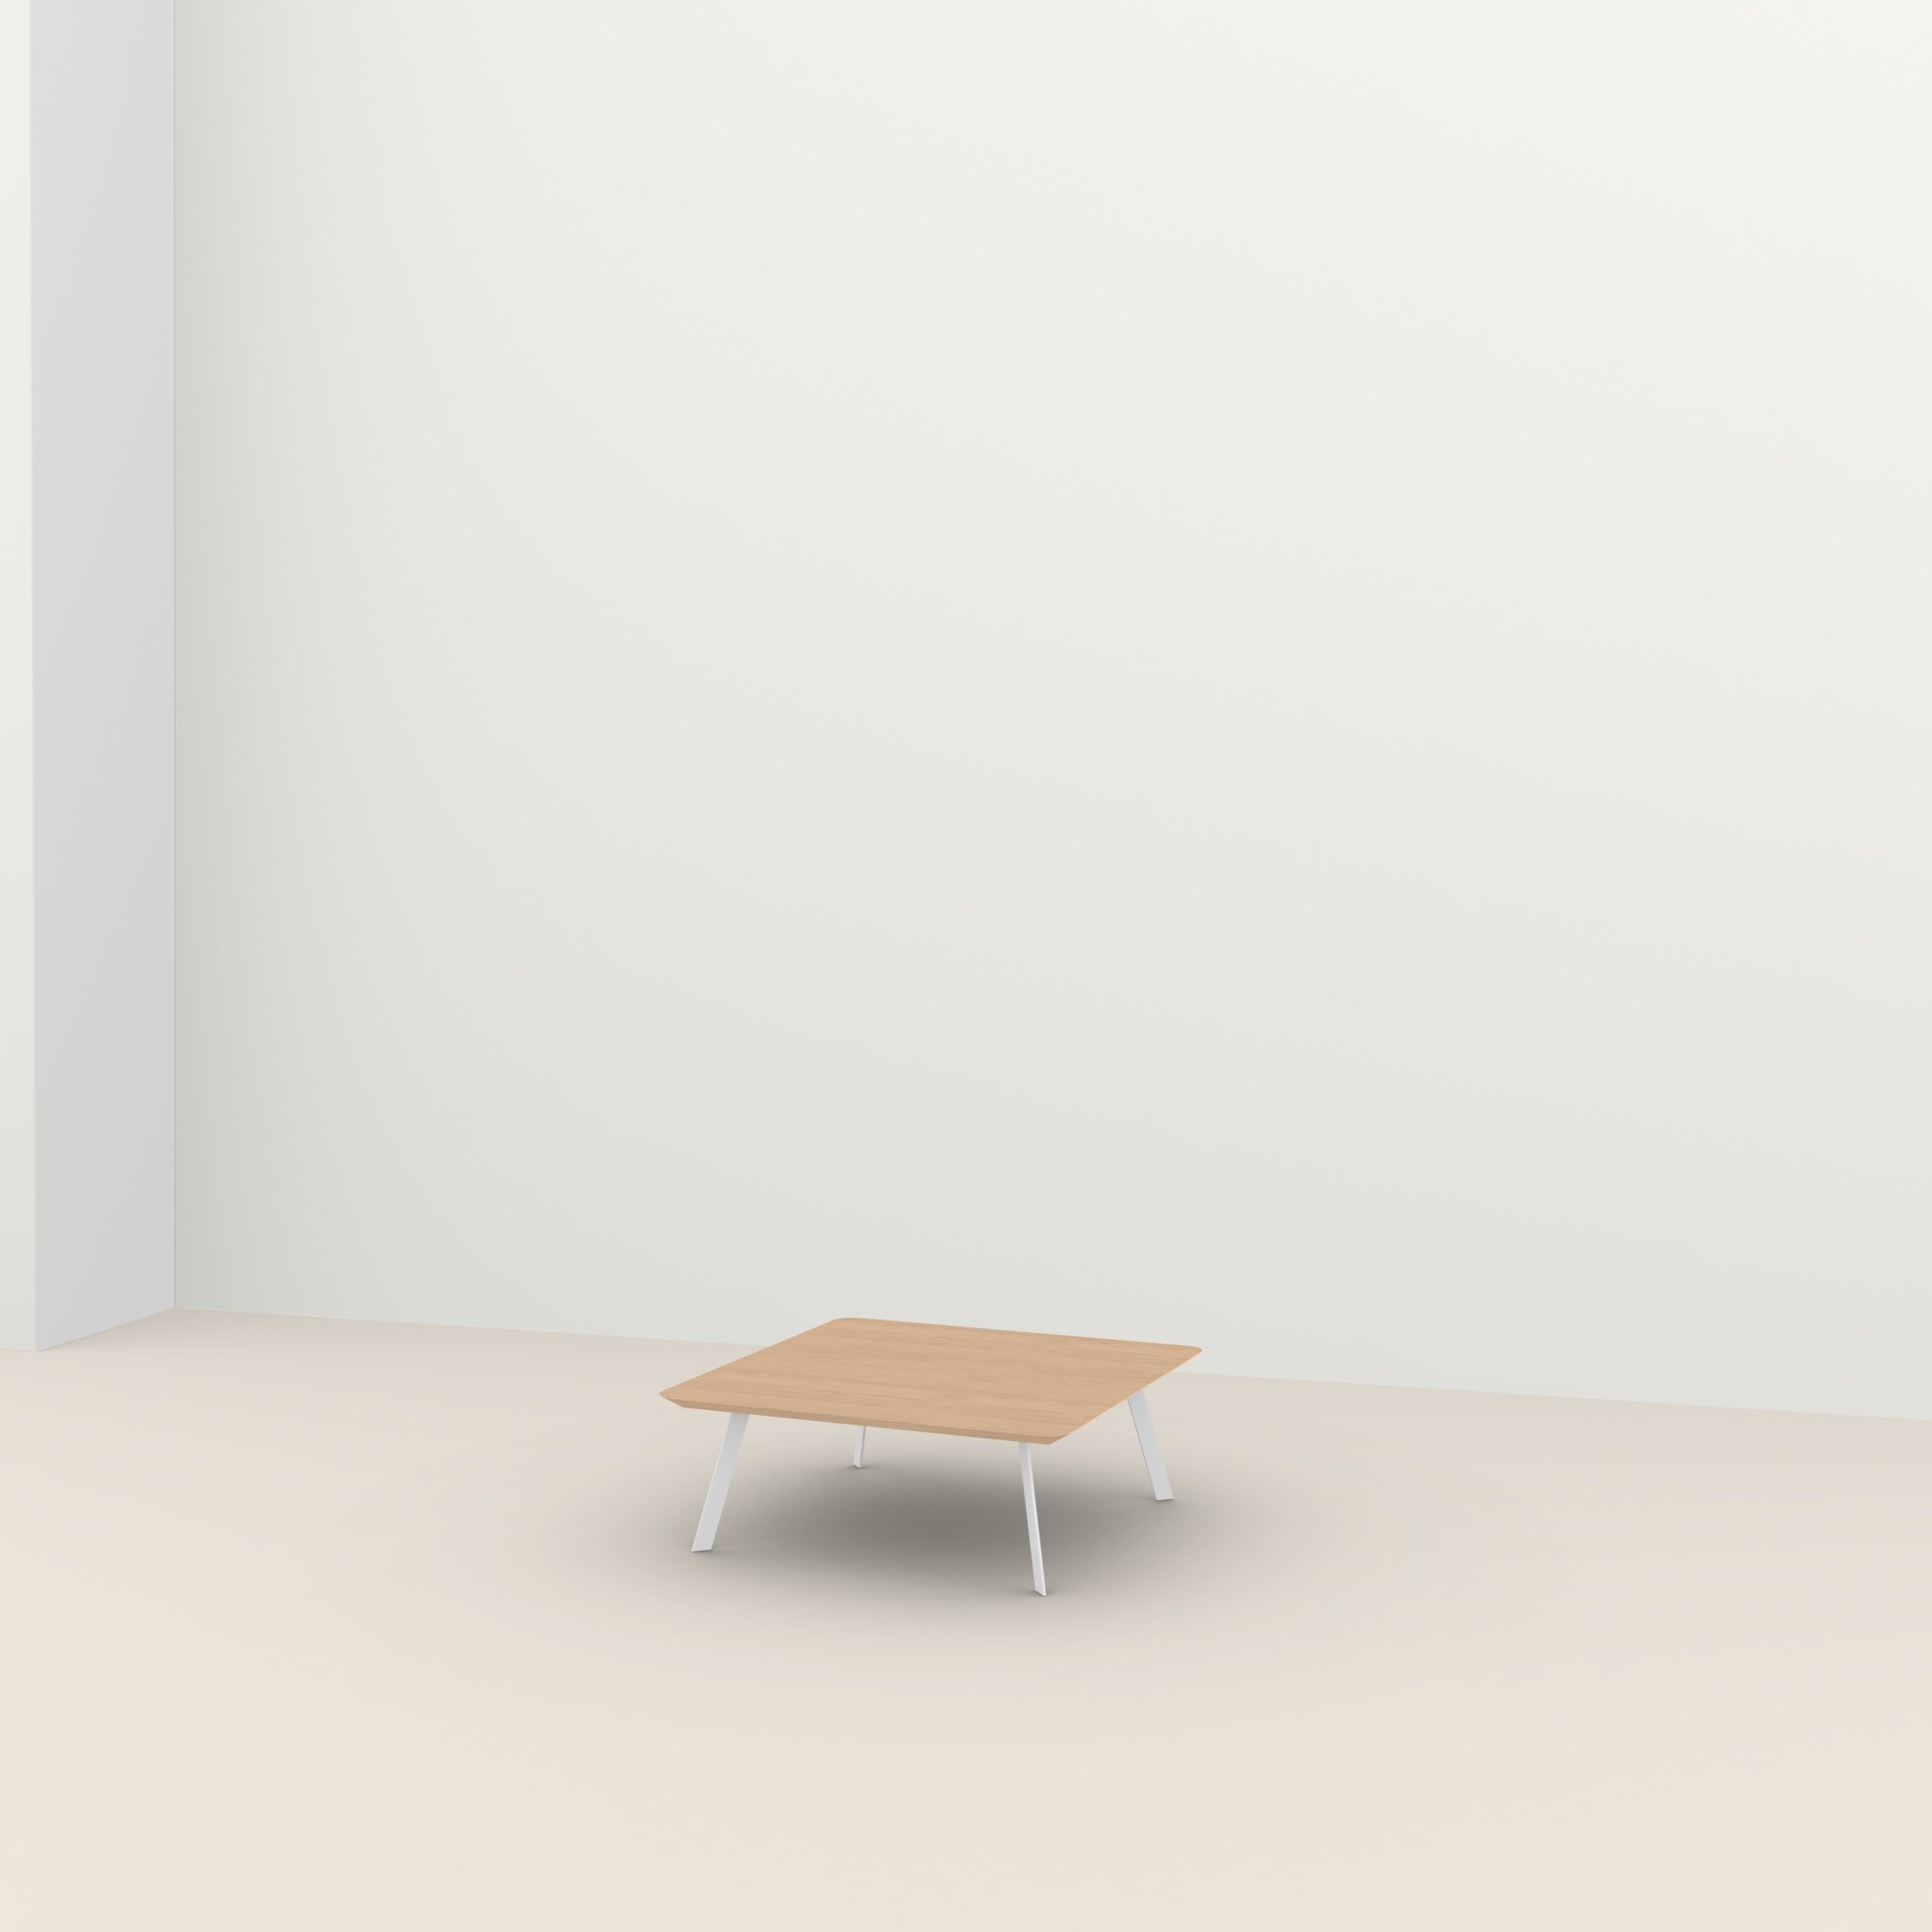 google_coffee_table_title_suffix | New Co Coffee Table 90 Square White | Oak hardwax oil natural light 3041 | Studio HENK| 